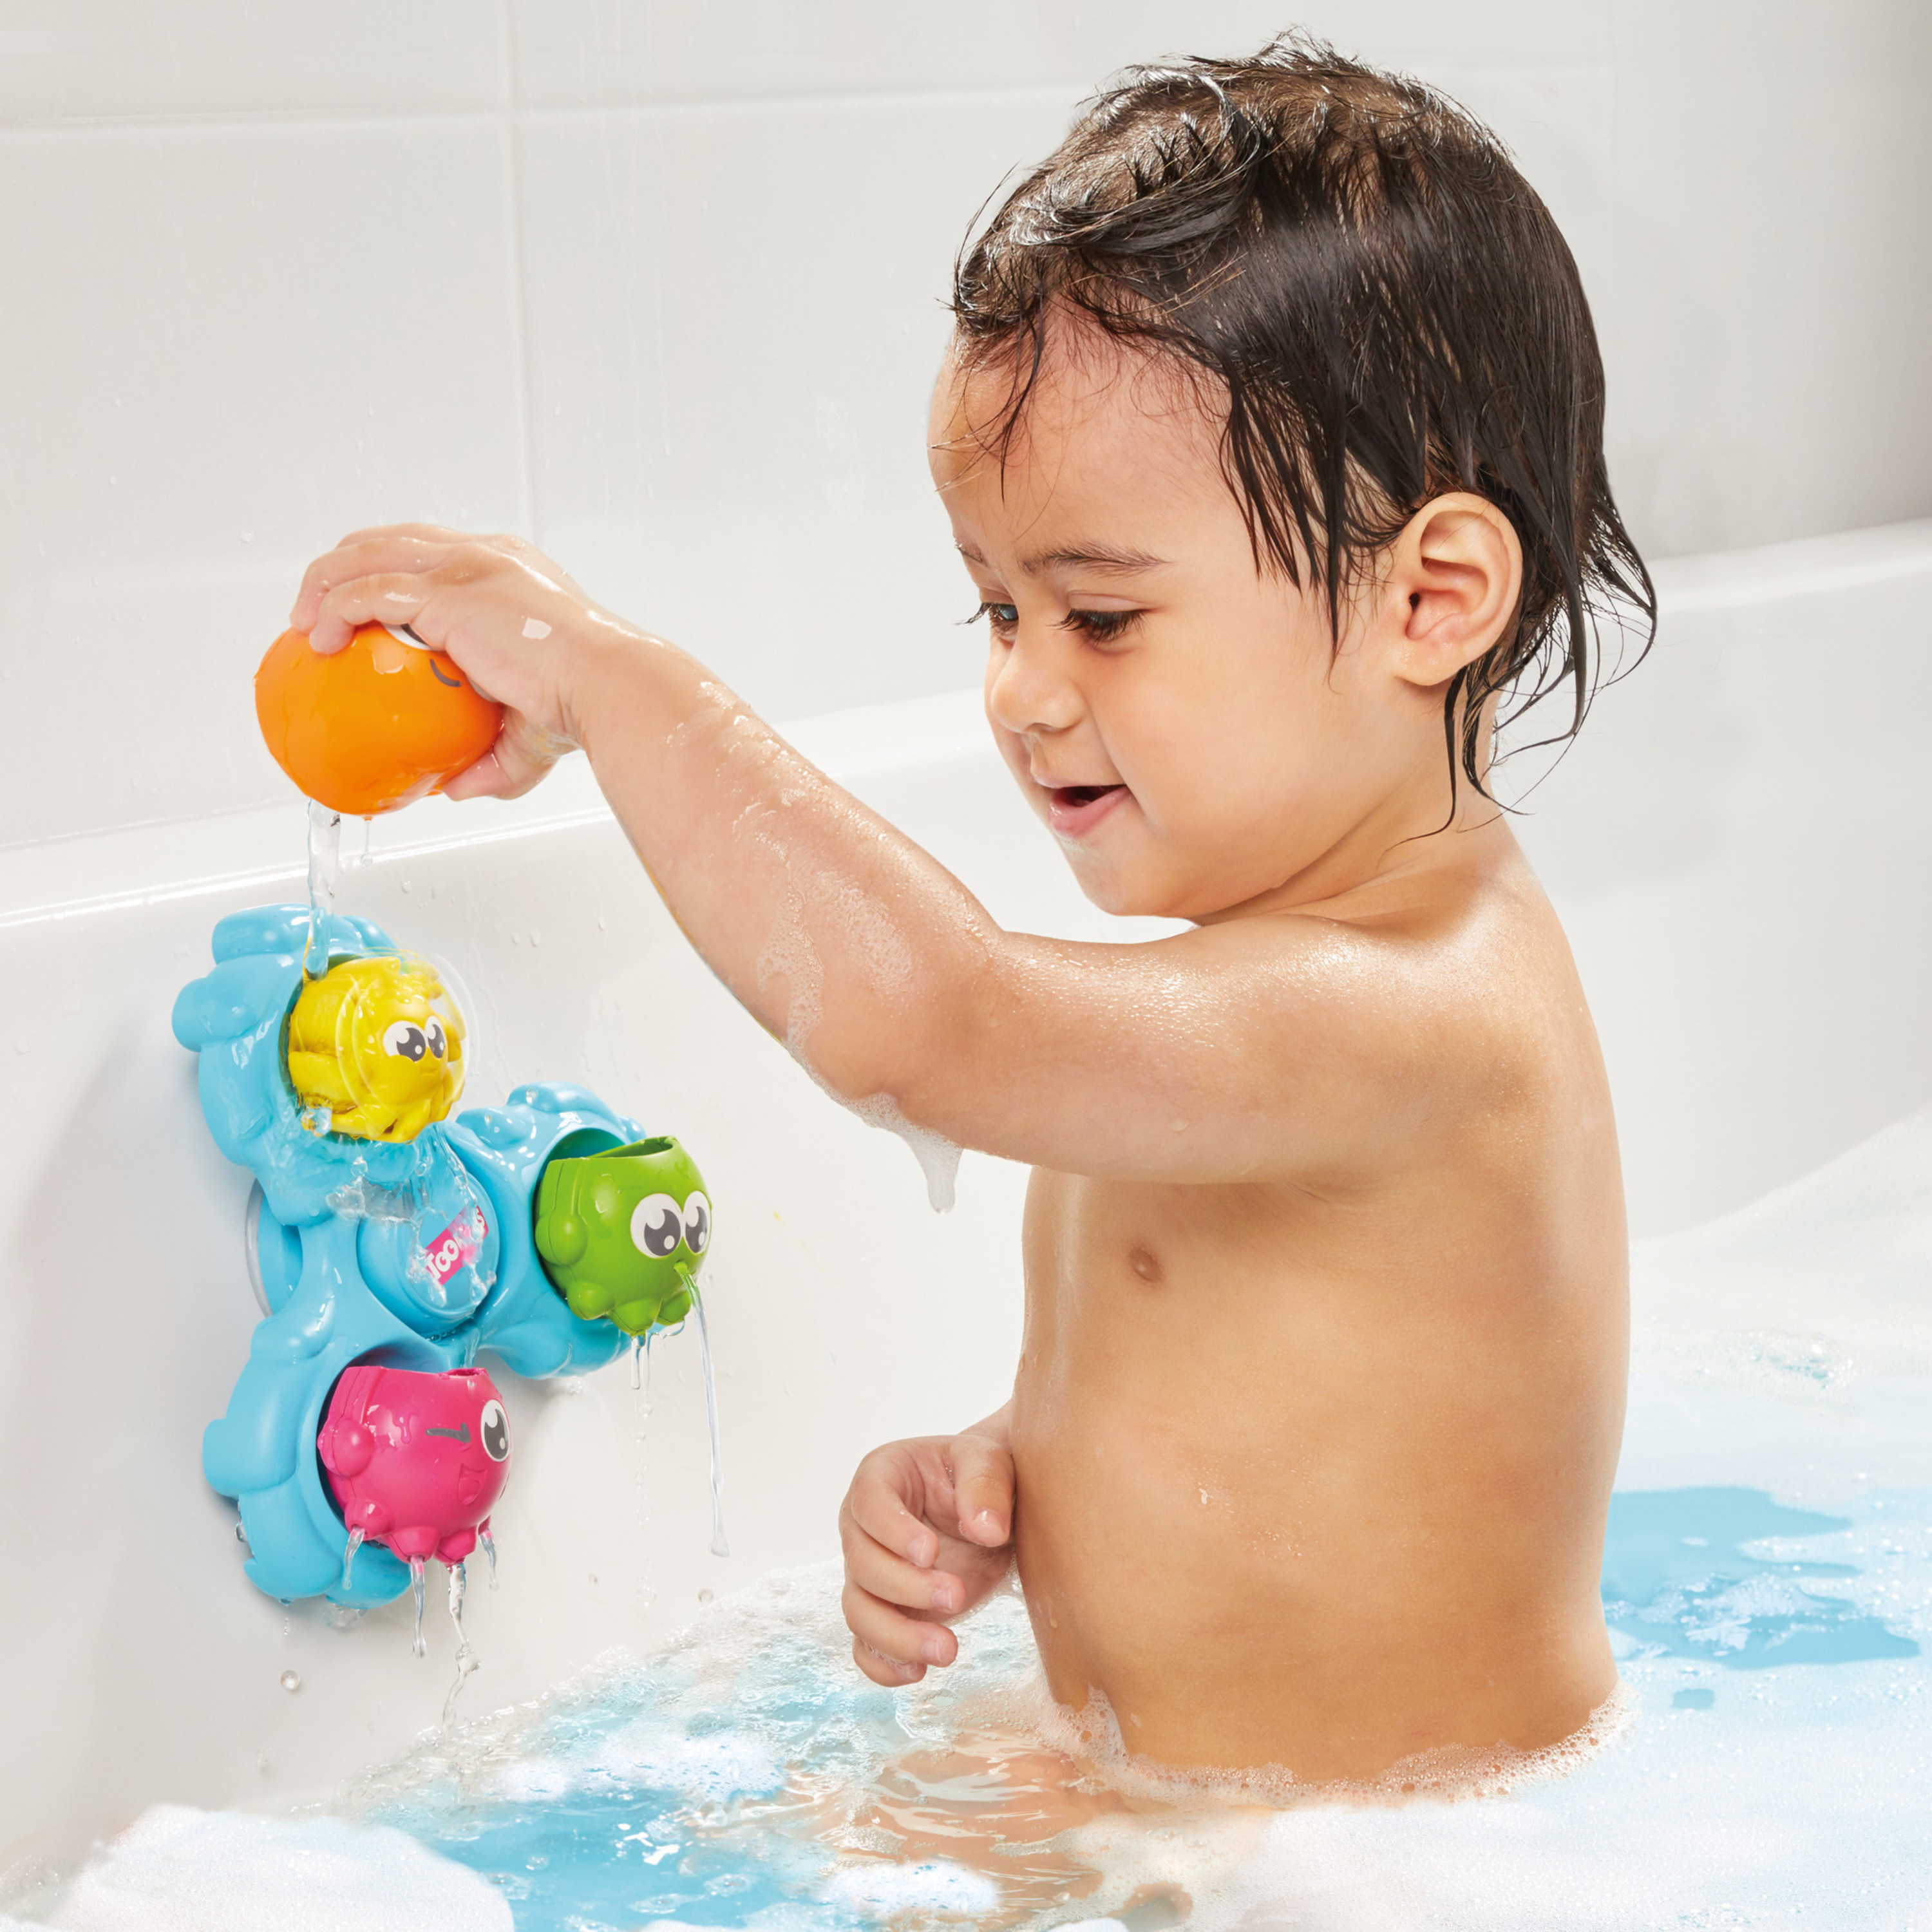 TOMY Toomies Spin And Splash Octopals Bath Toy, Colorful and Fun Toddler Bath Toys - image 6 of 6